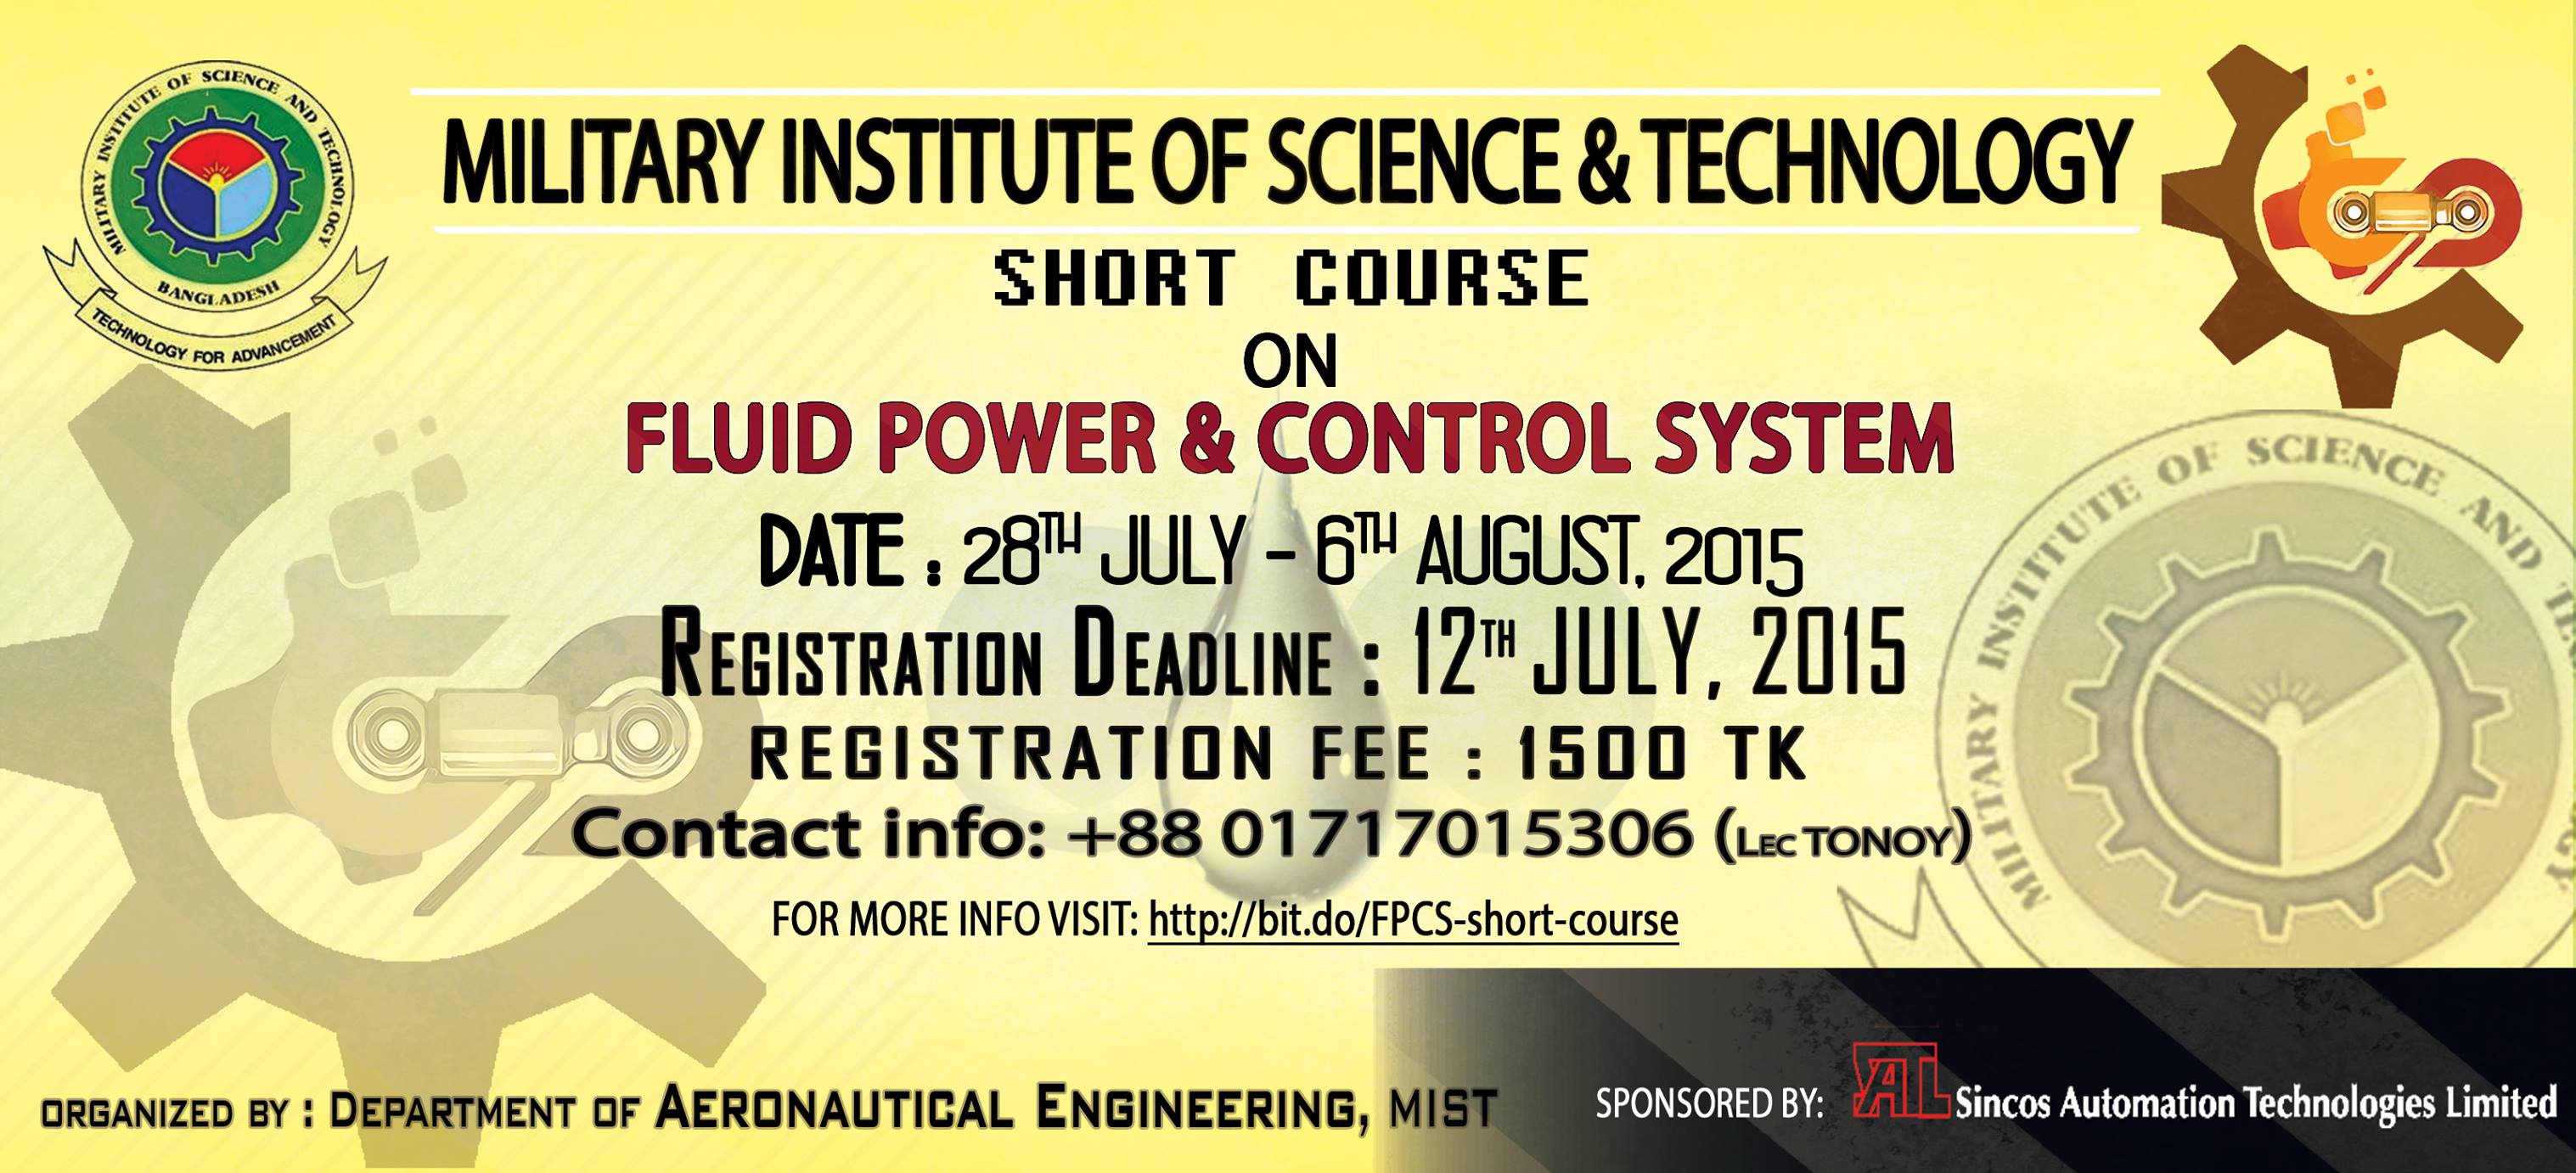 SHORT COURSE ON "FLUID POWER & CONTROL SYSTEM"